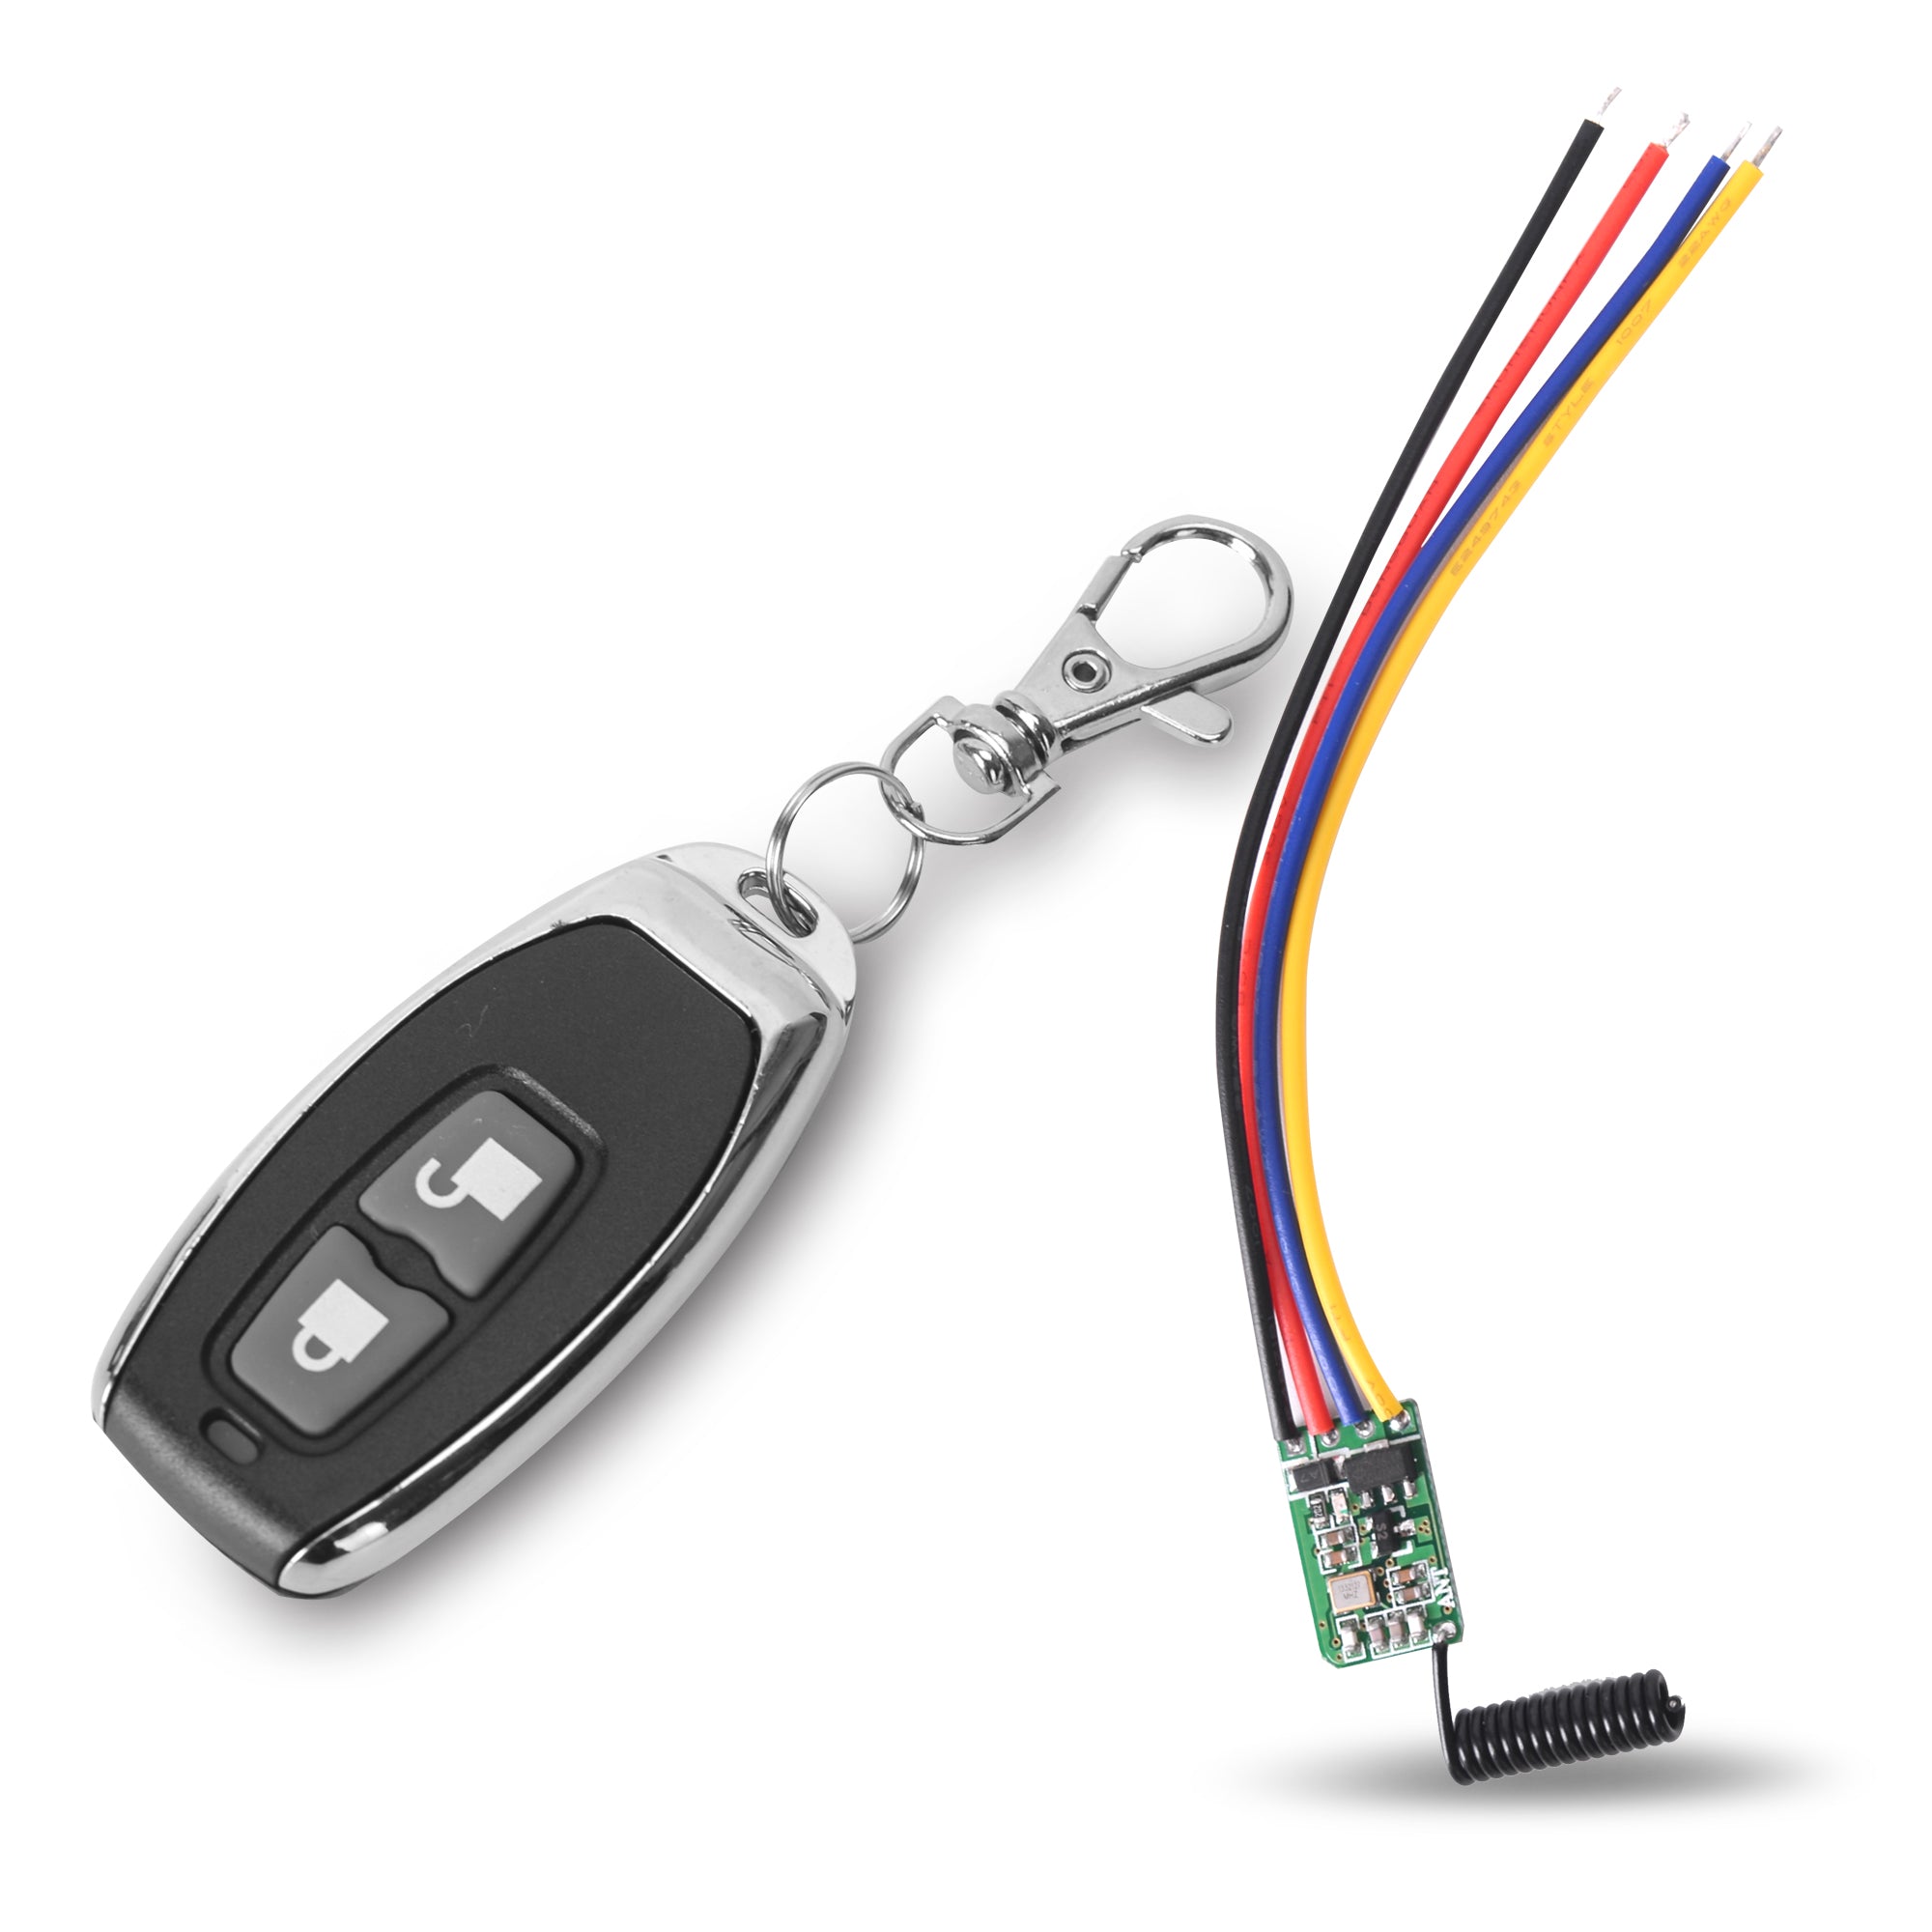 A Mini Controller For A Light Low Voltage Load - Handles Up to 1A